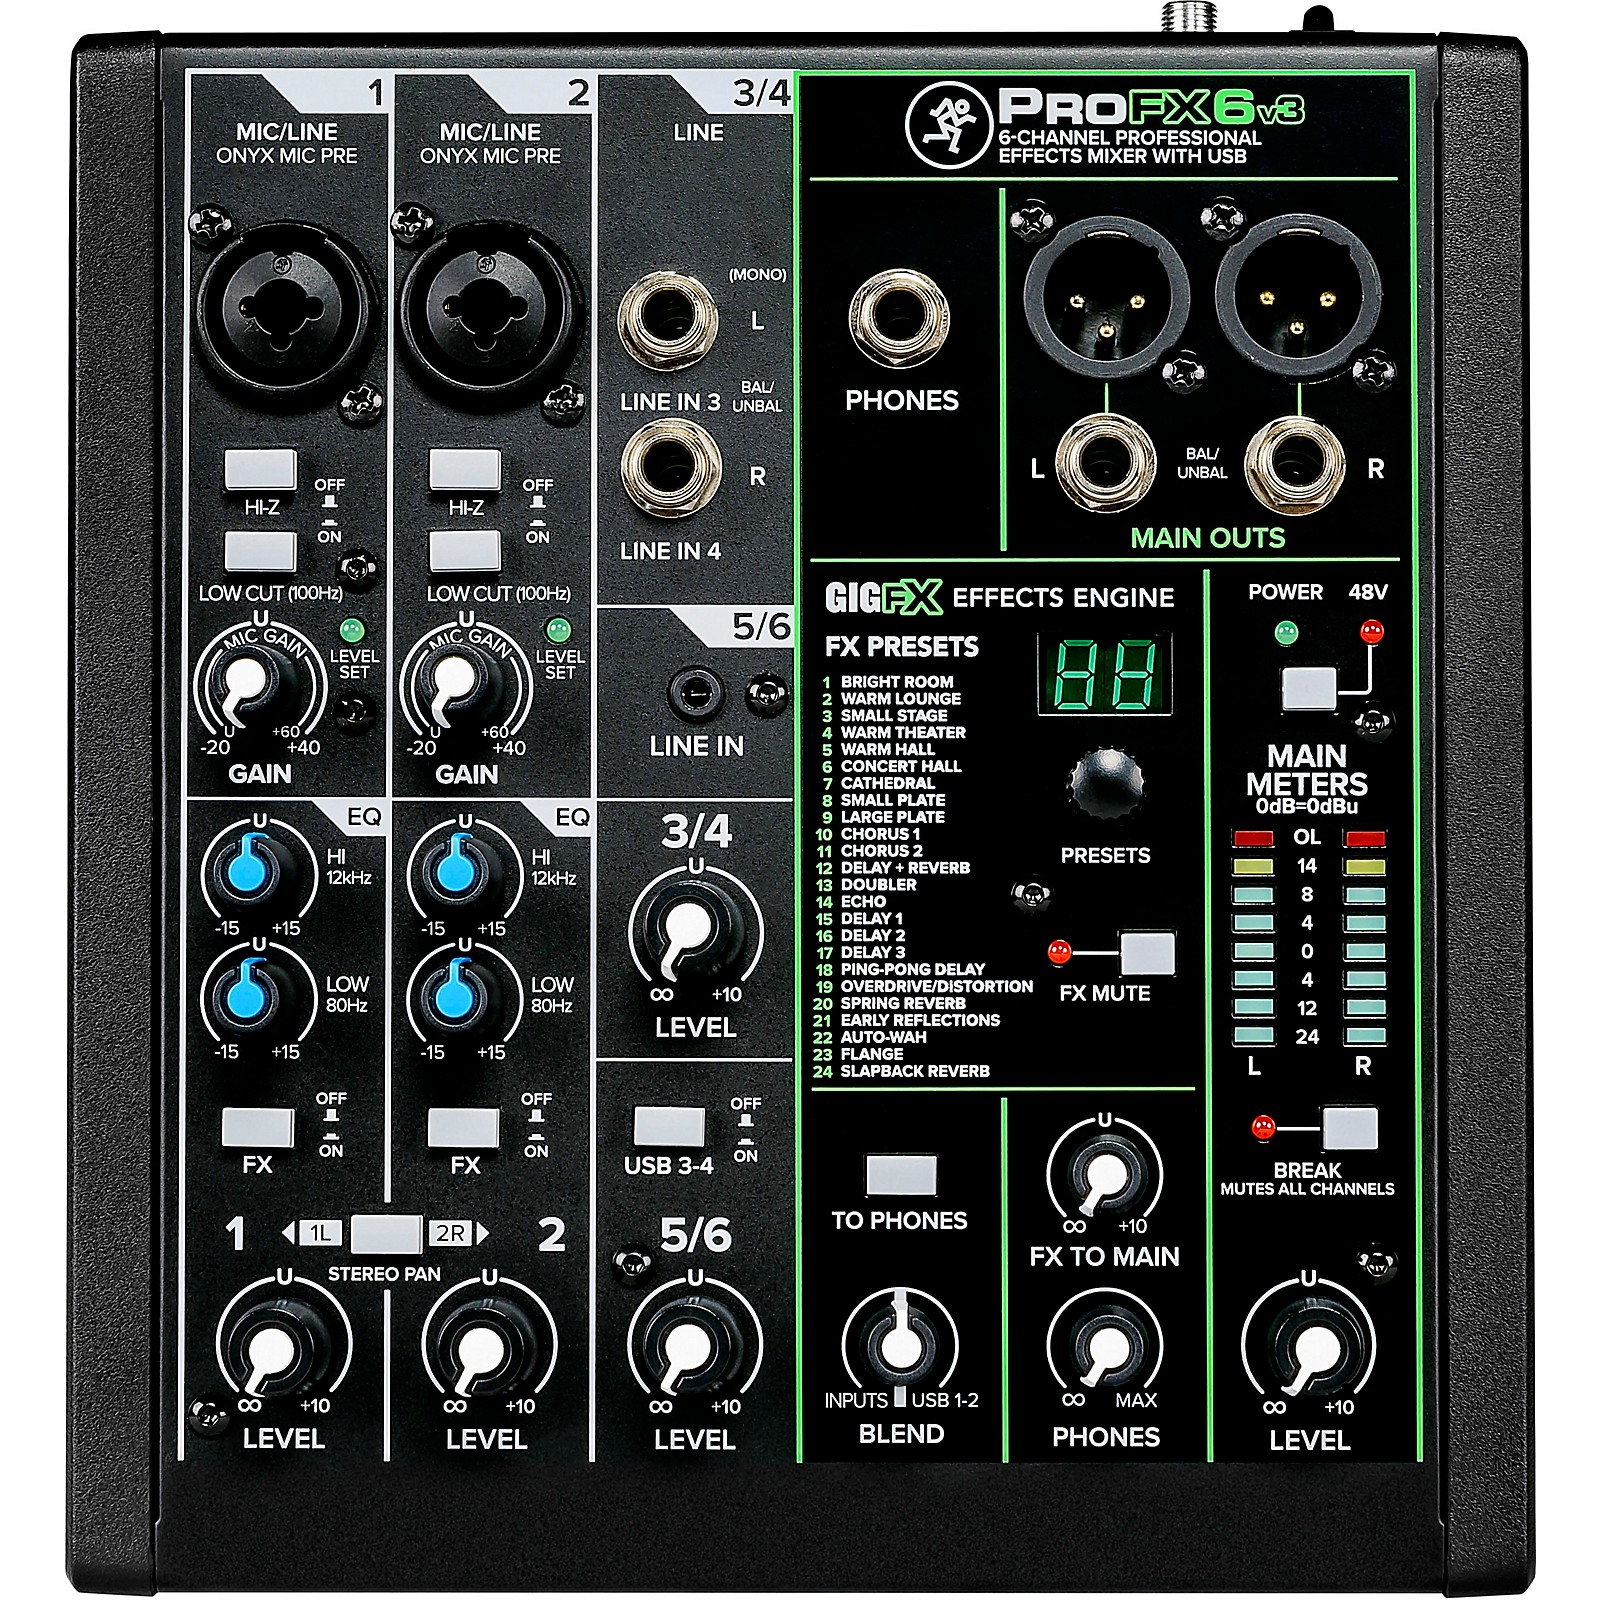 XLR Cables 2 New Mackie PROFX4v2 4 Channel Compact Mixer w Effects PROFX4 V2 